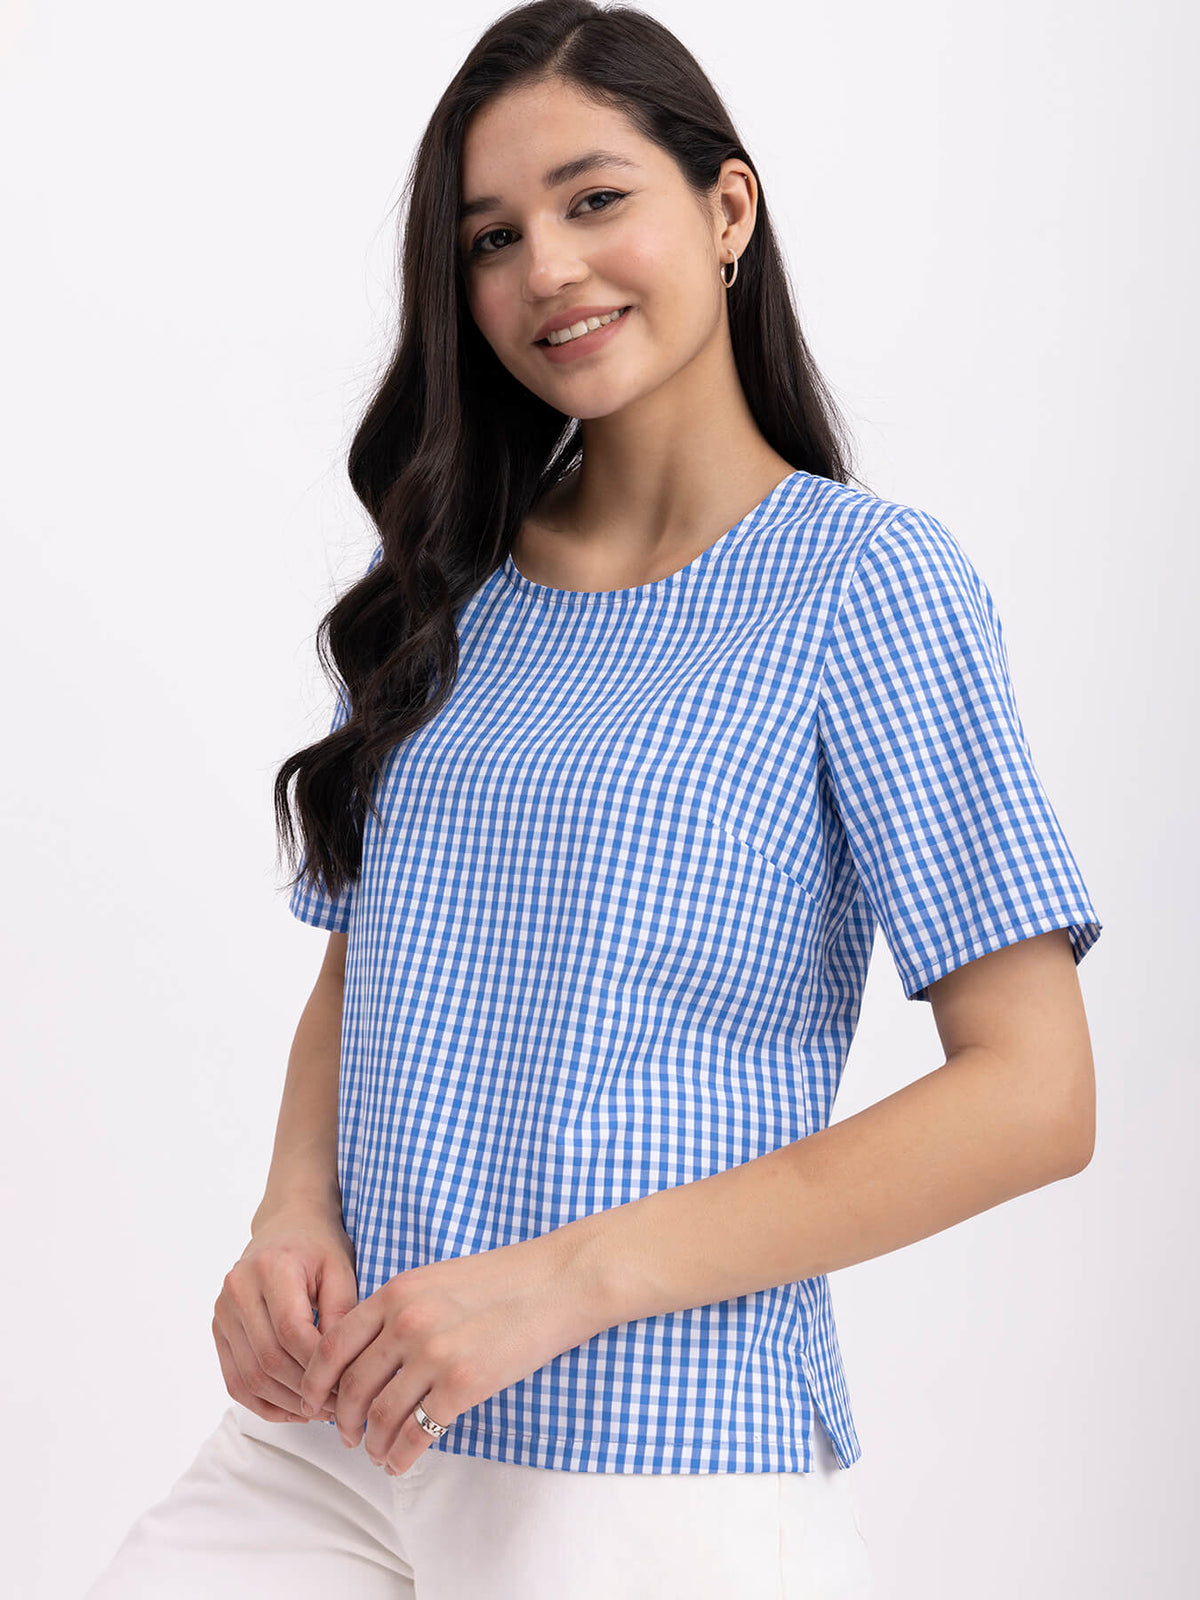 Cotton Round Neck Top - Blue And White